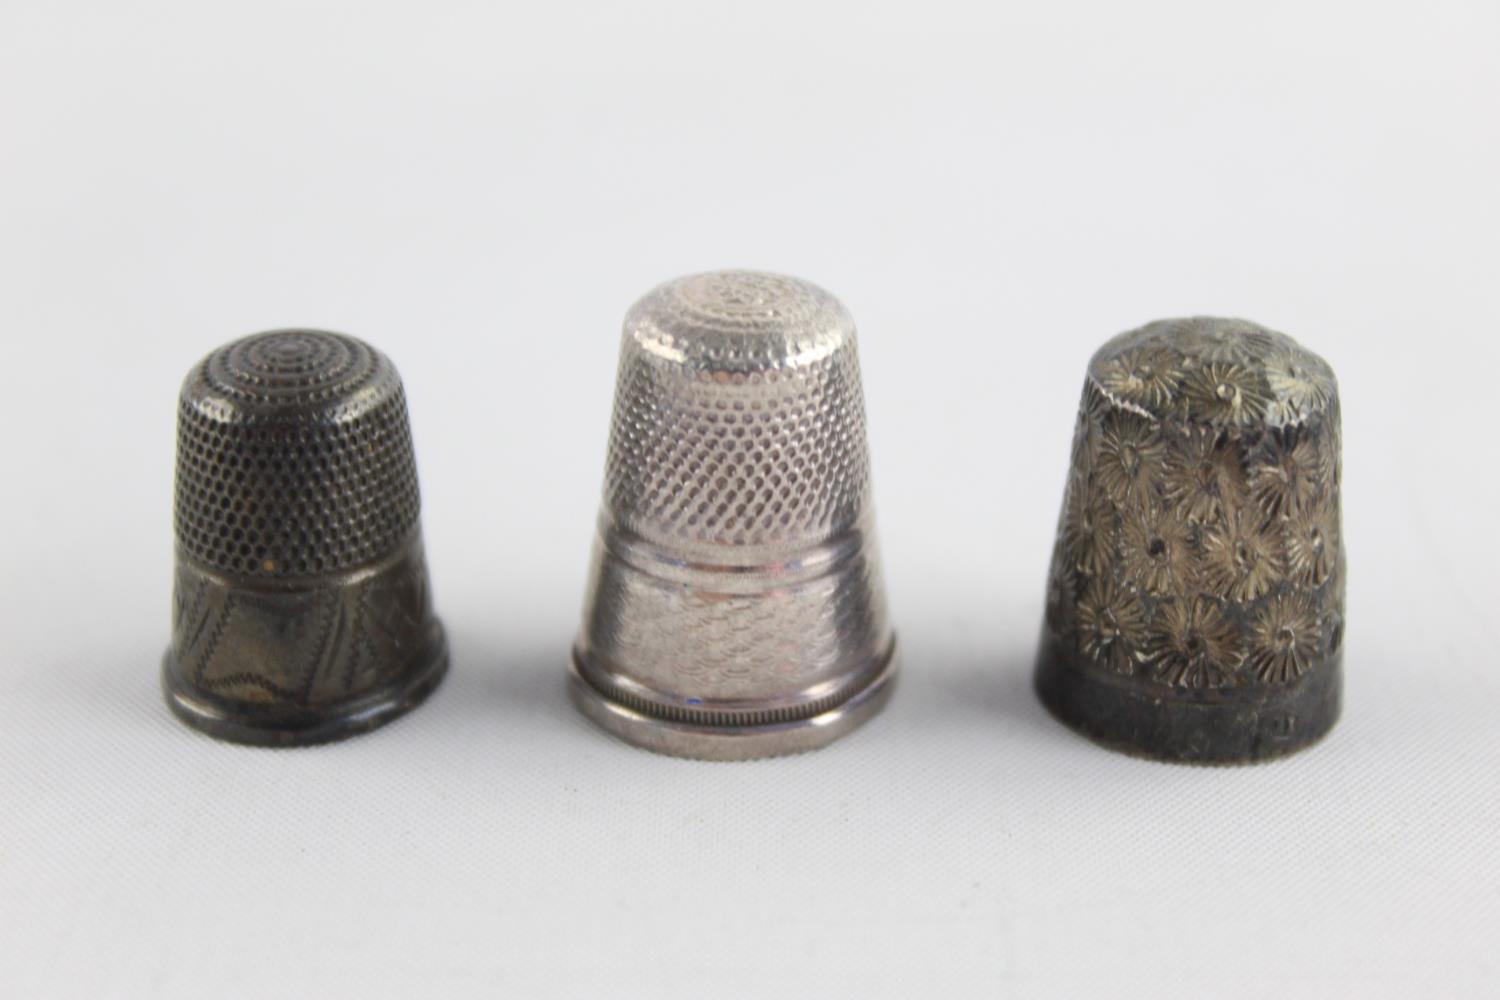 4 x Antique / Vintage Hallmarked .925 STERLING SILVER Thimbles & Part Buckle 29g - Image 2 of 7